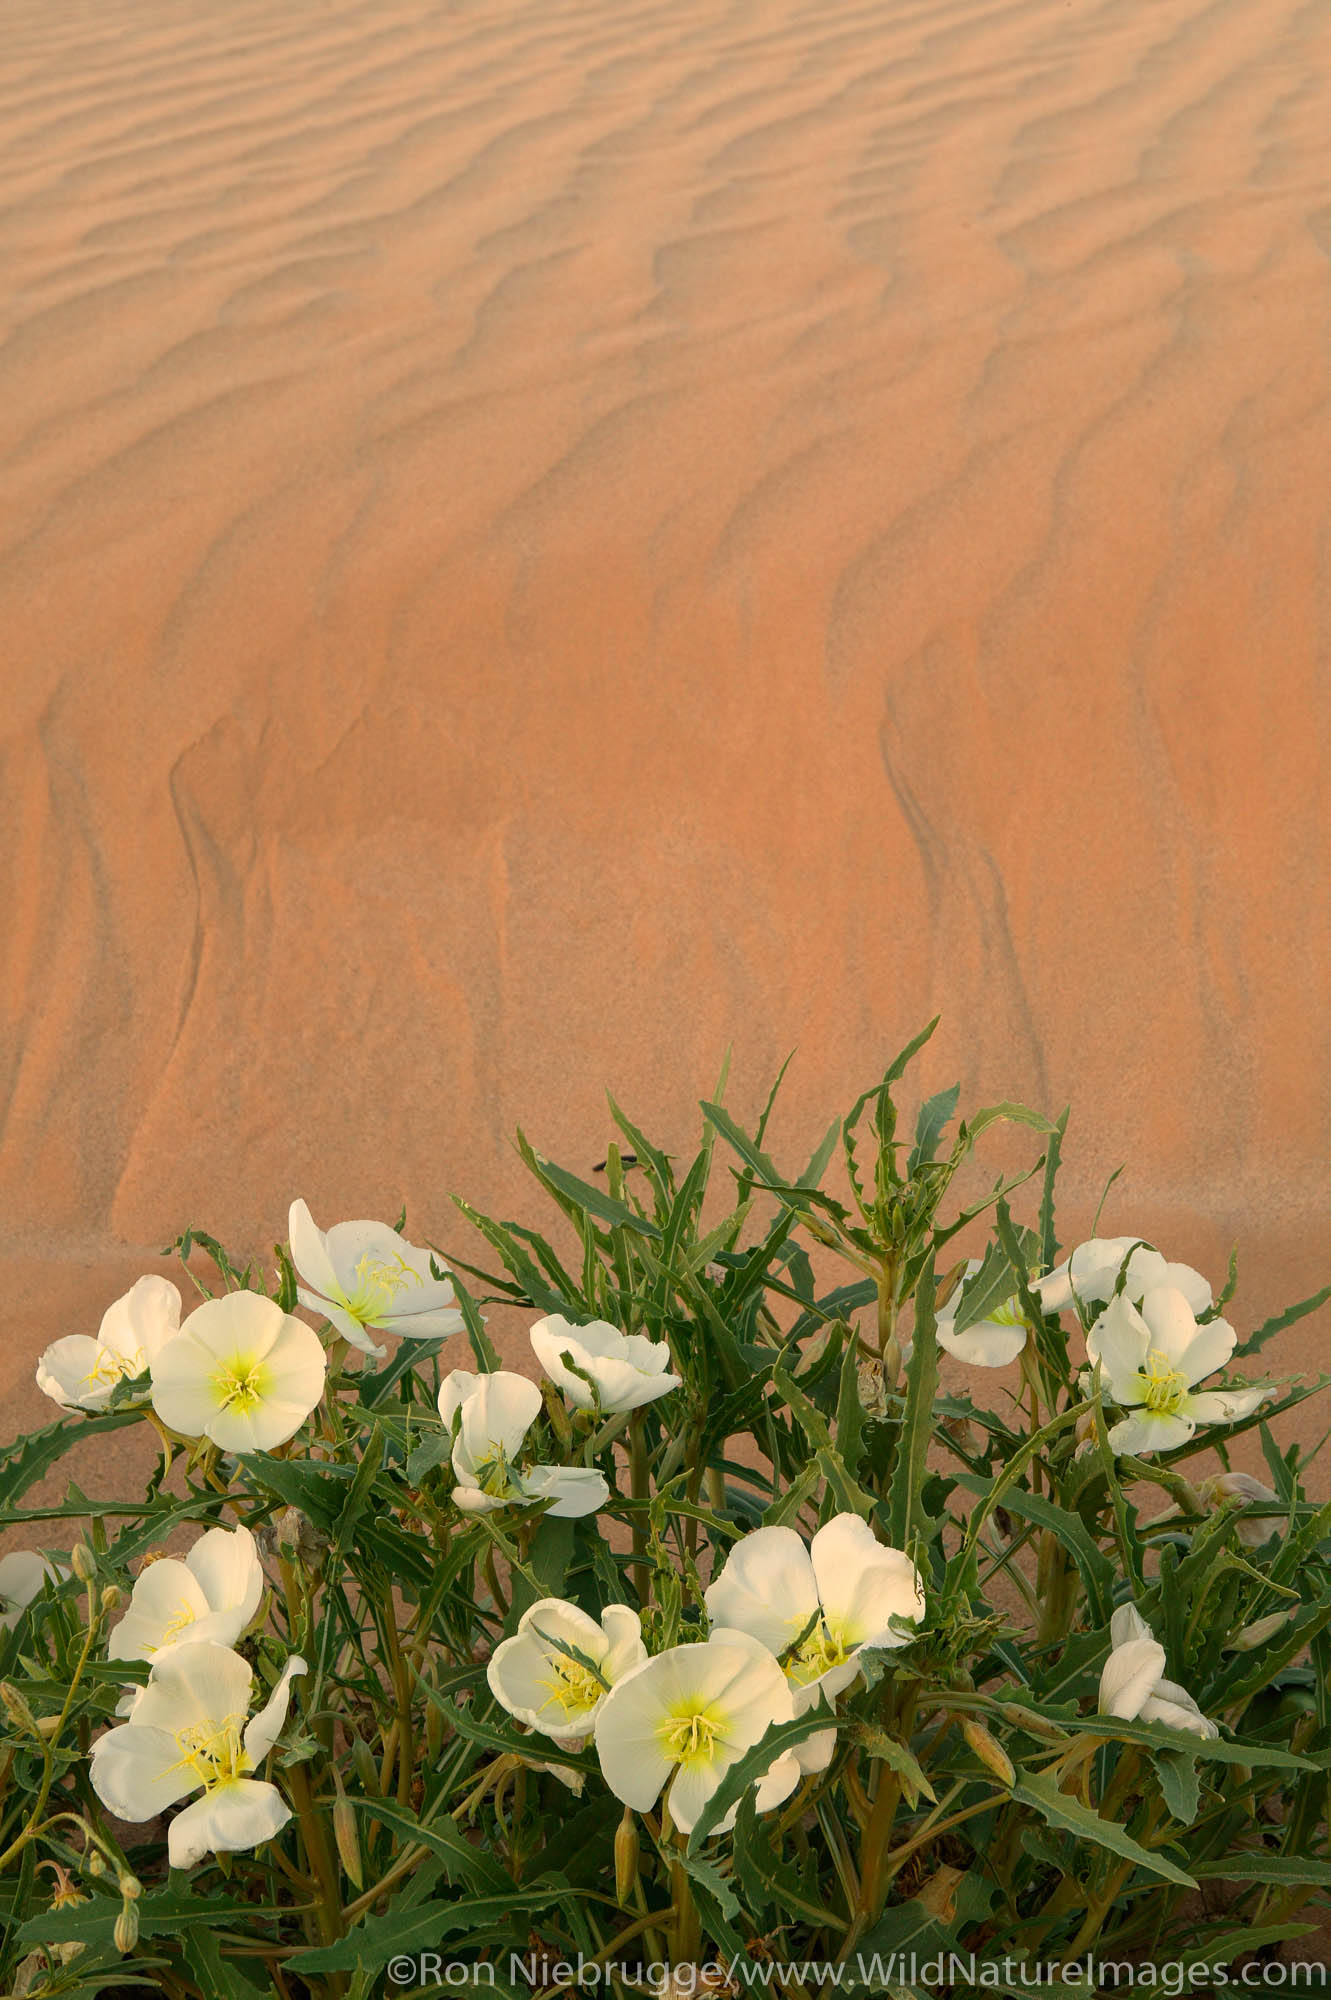 Sand Verbena (Abronia villosa) and Dune Evening Primrose (Oenothera deltoides), Imperial Sand Dunes Recreation Area, Southern...